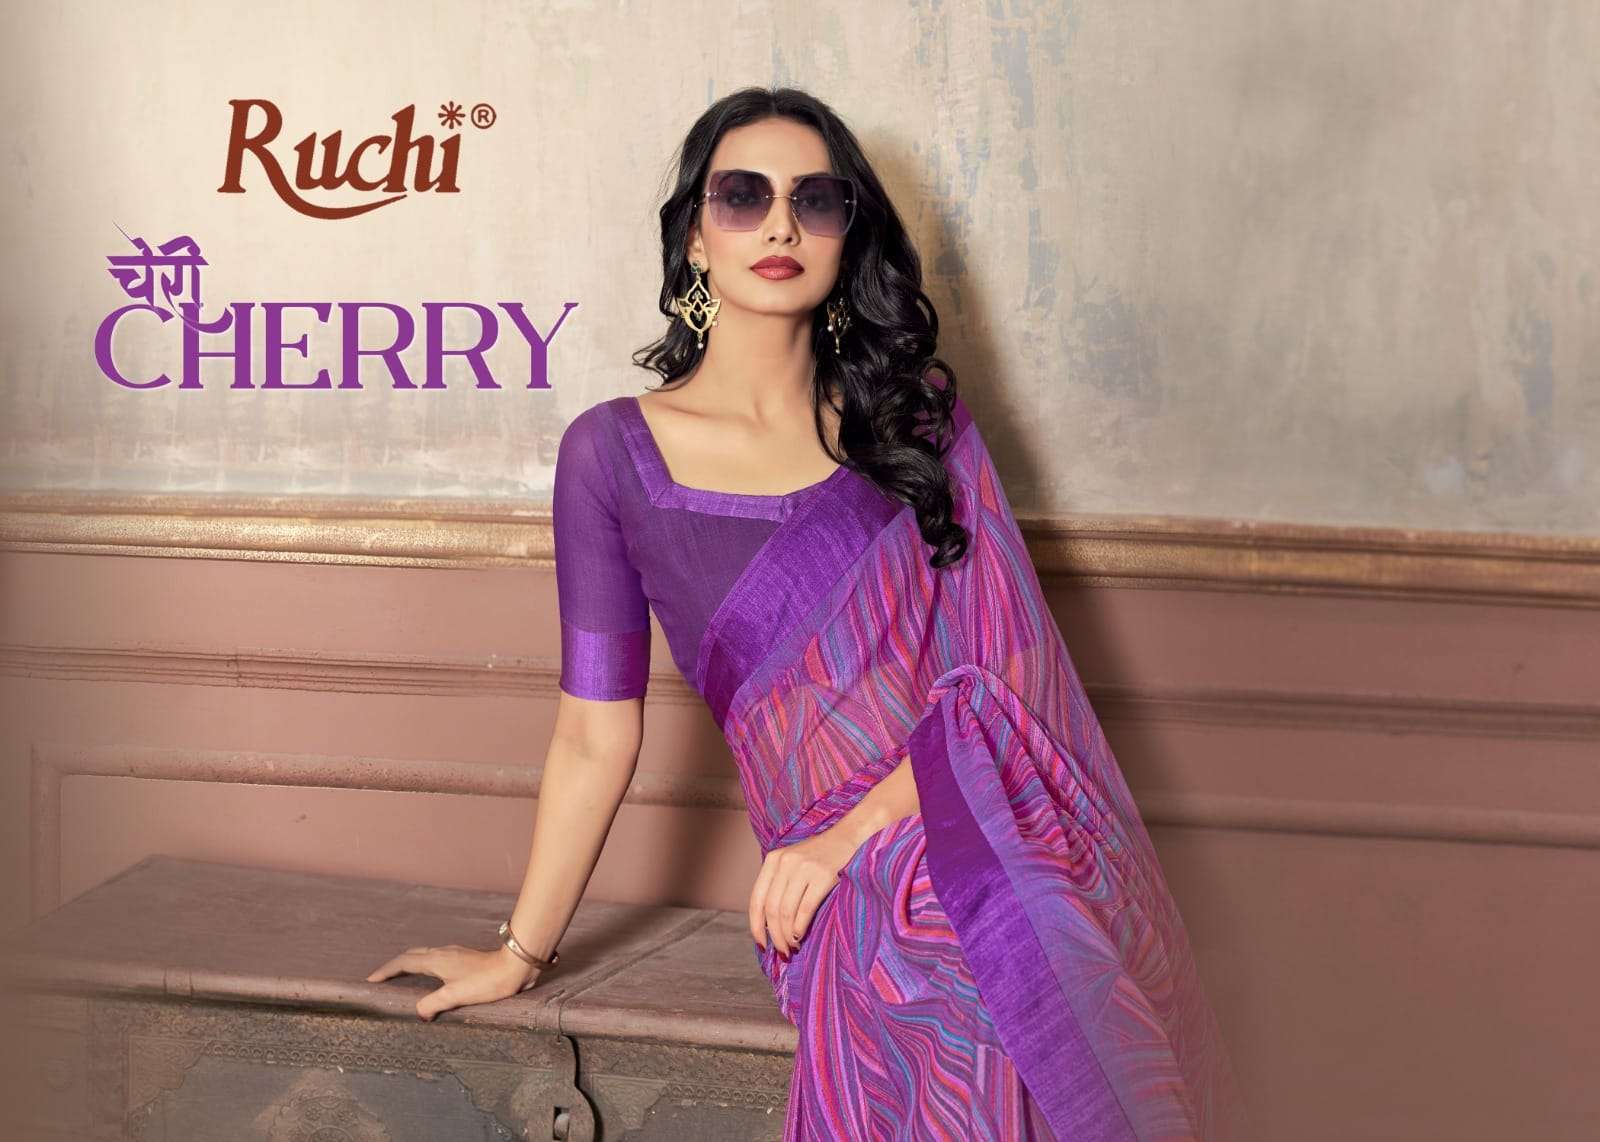 Ruchi Saree Cherry Vol 40 Fancy Printed Chiffon Saree Suppliers In Online Collection